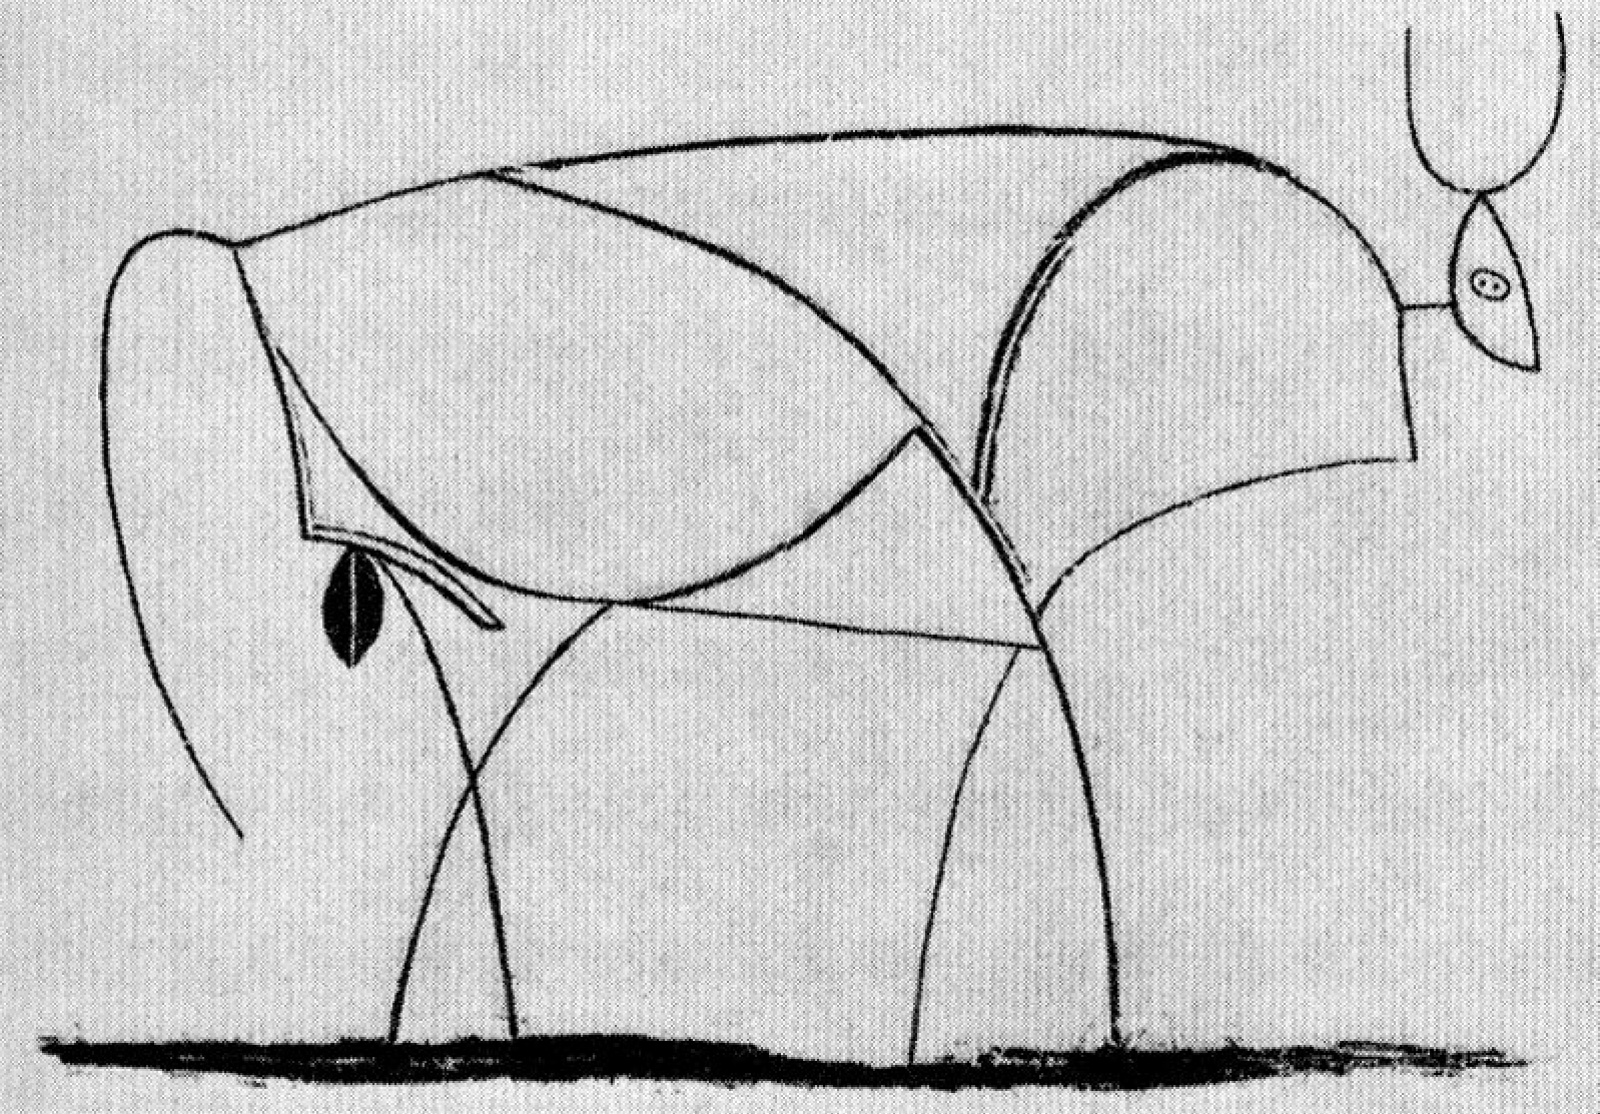 A line drawing of a bull by Pablo Picasso - Playground